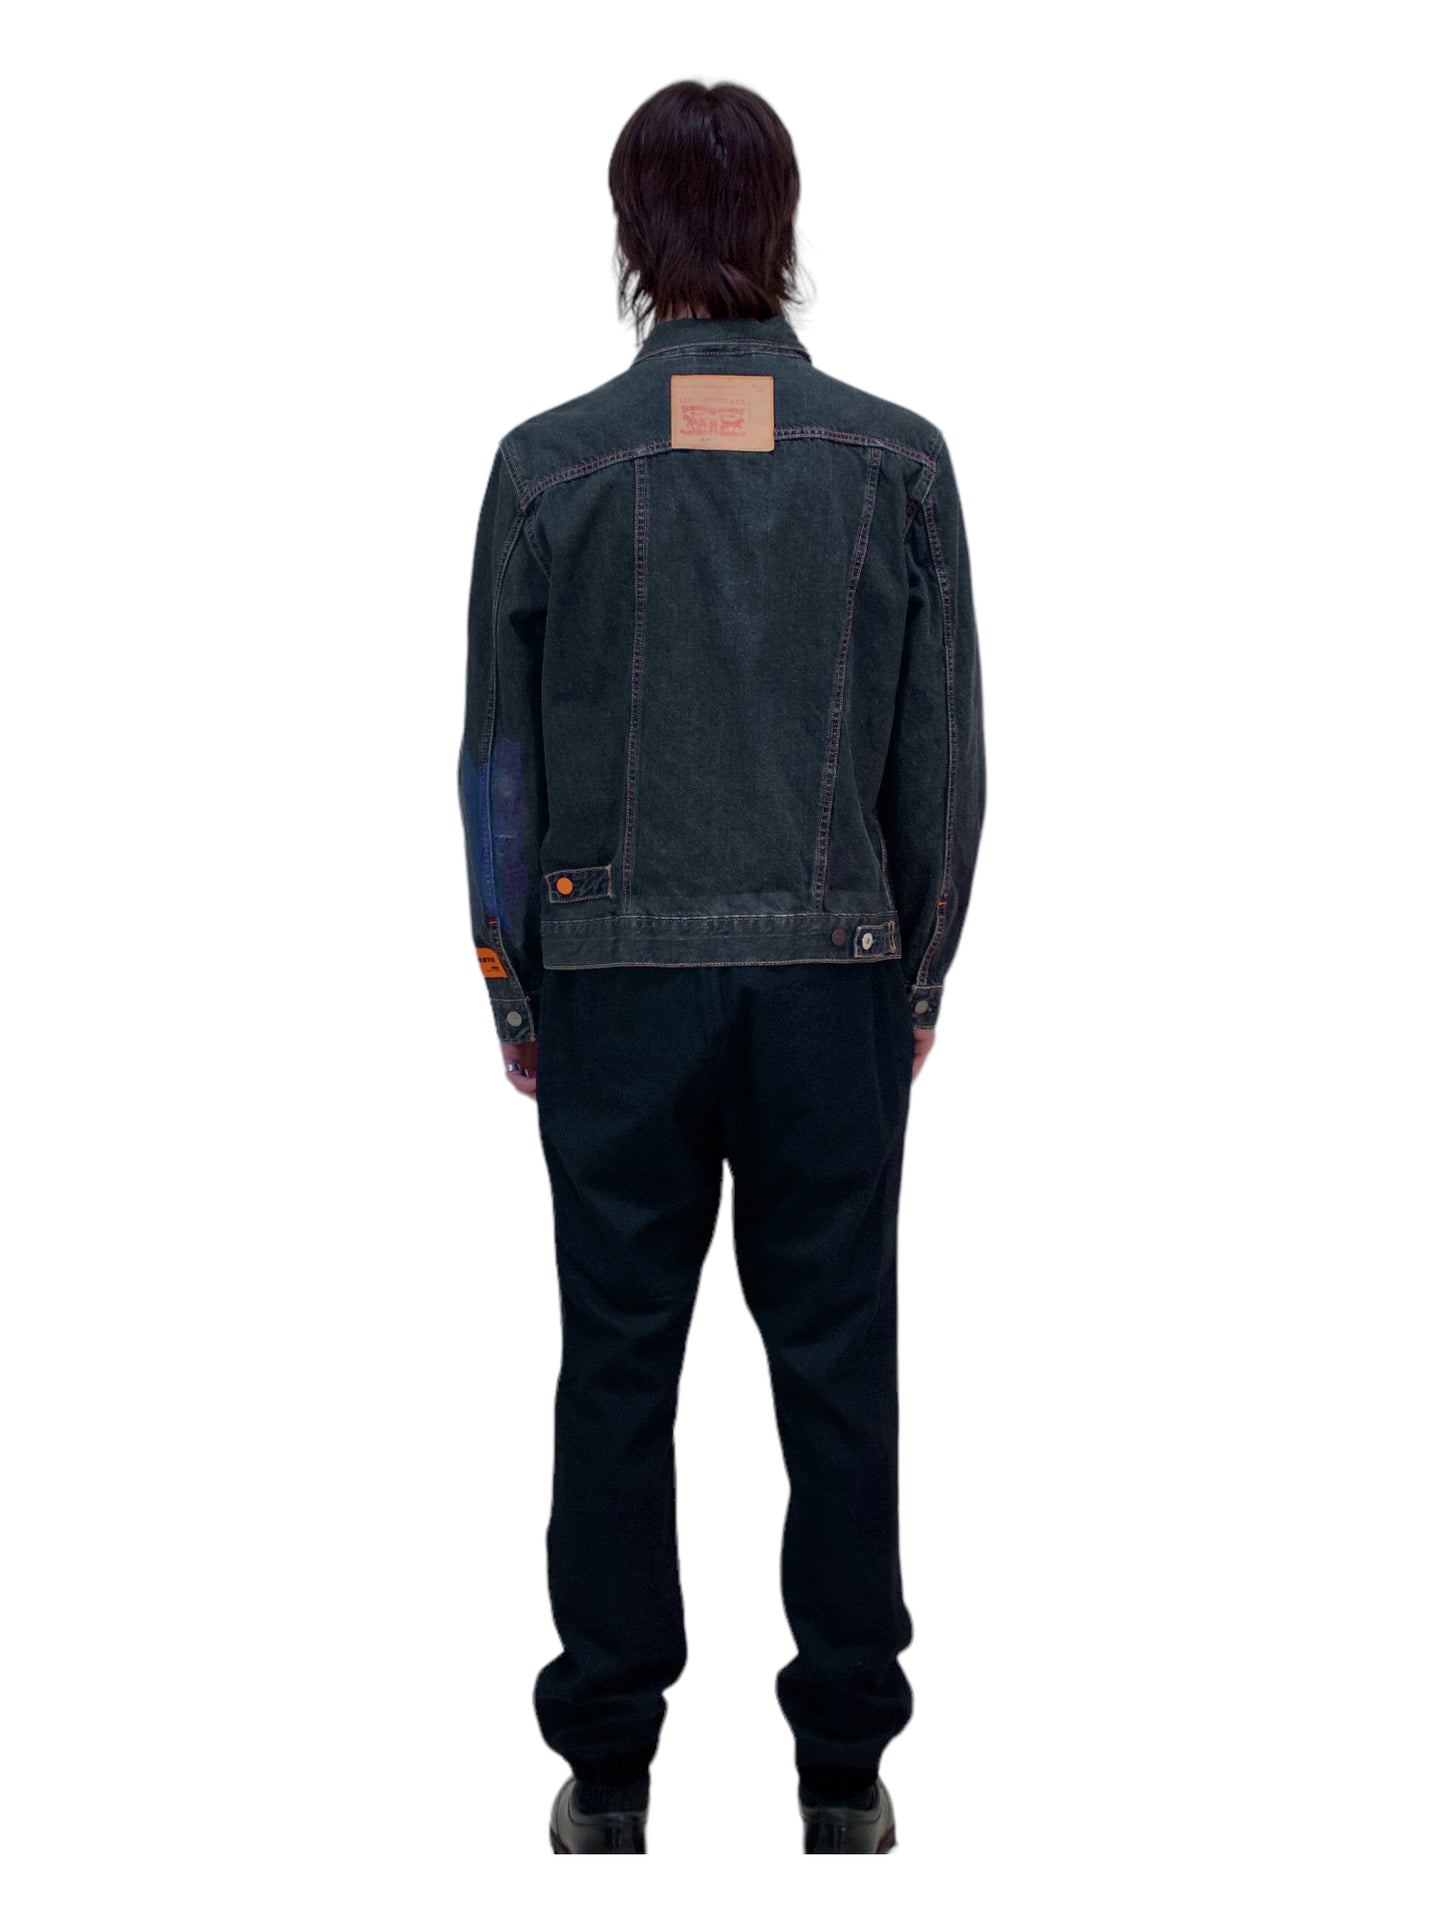 Heron Preston X Levi's Washed Black Denim Trucker Jean Jacket - Genuine Design Luxury Consignment. New & Pre-Owned Clothing, Shoes, & Accessories. Calgary, Canada